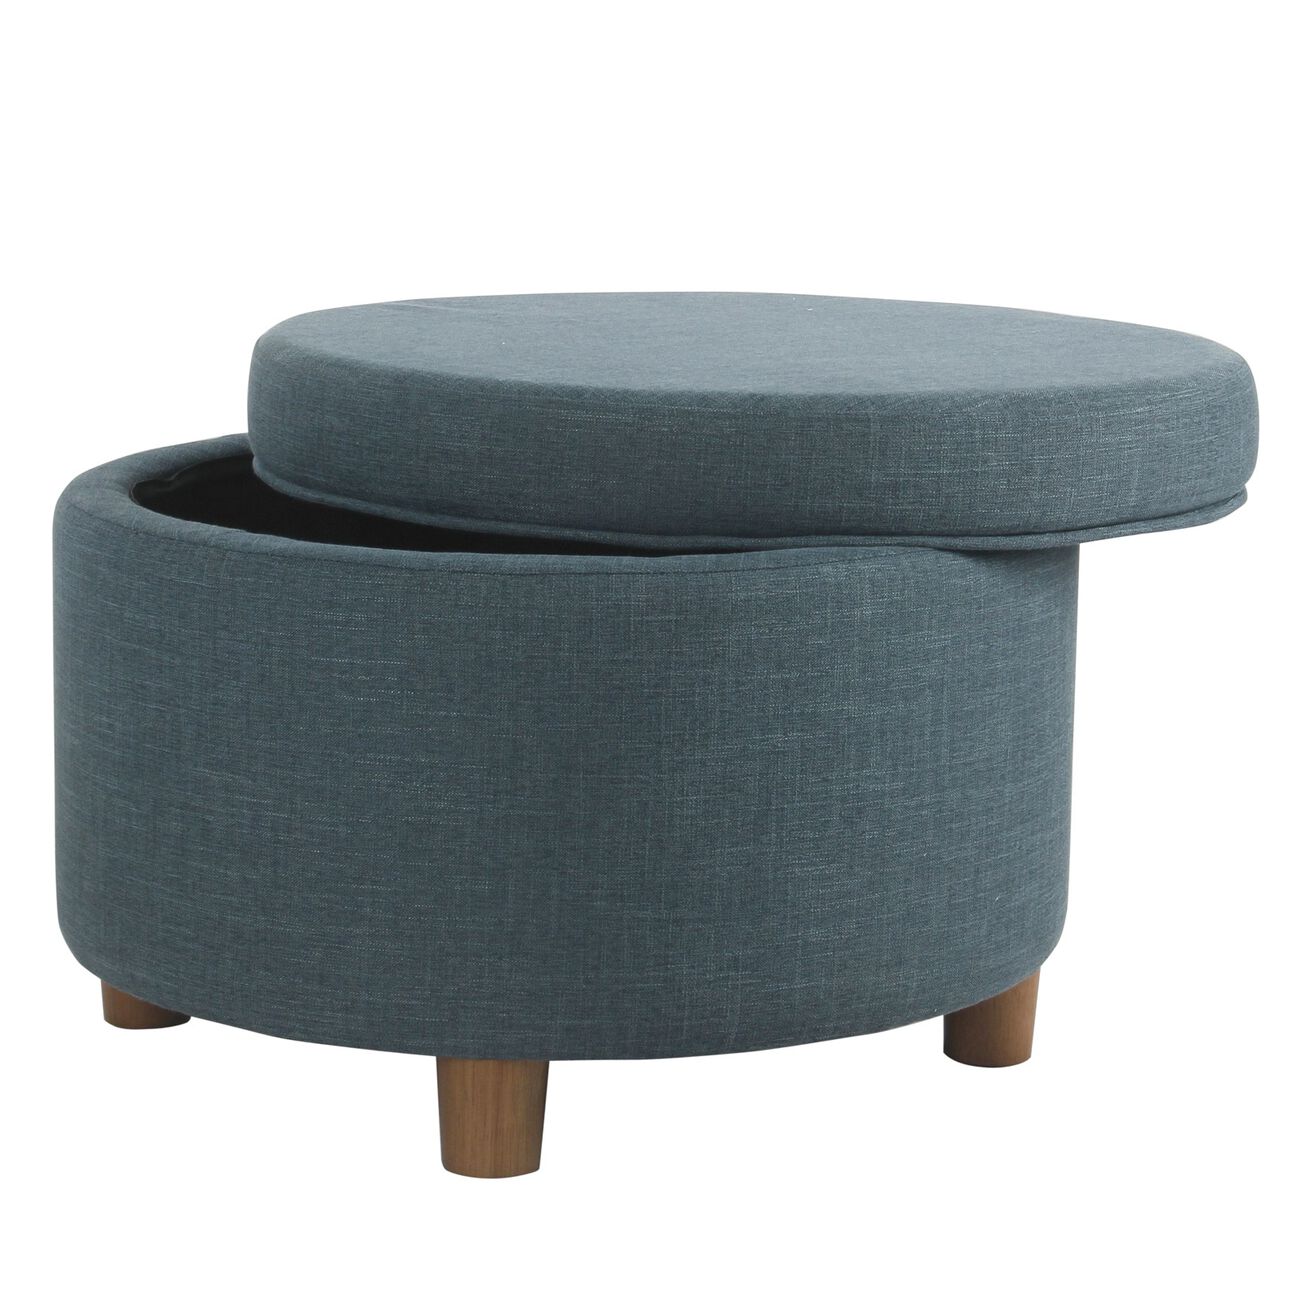 Fabric Upholstered Wooden Ottoman with Lift Off Lid Storage, Teal Blue